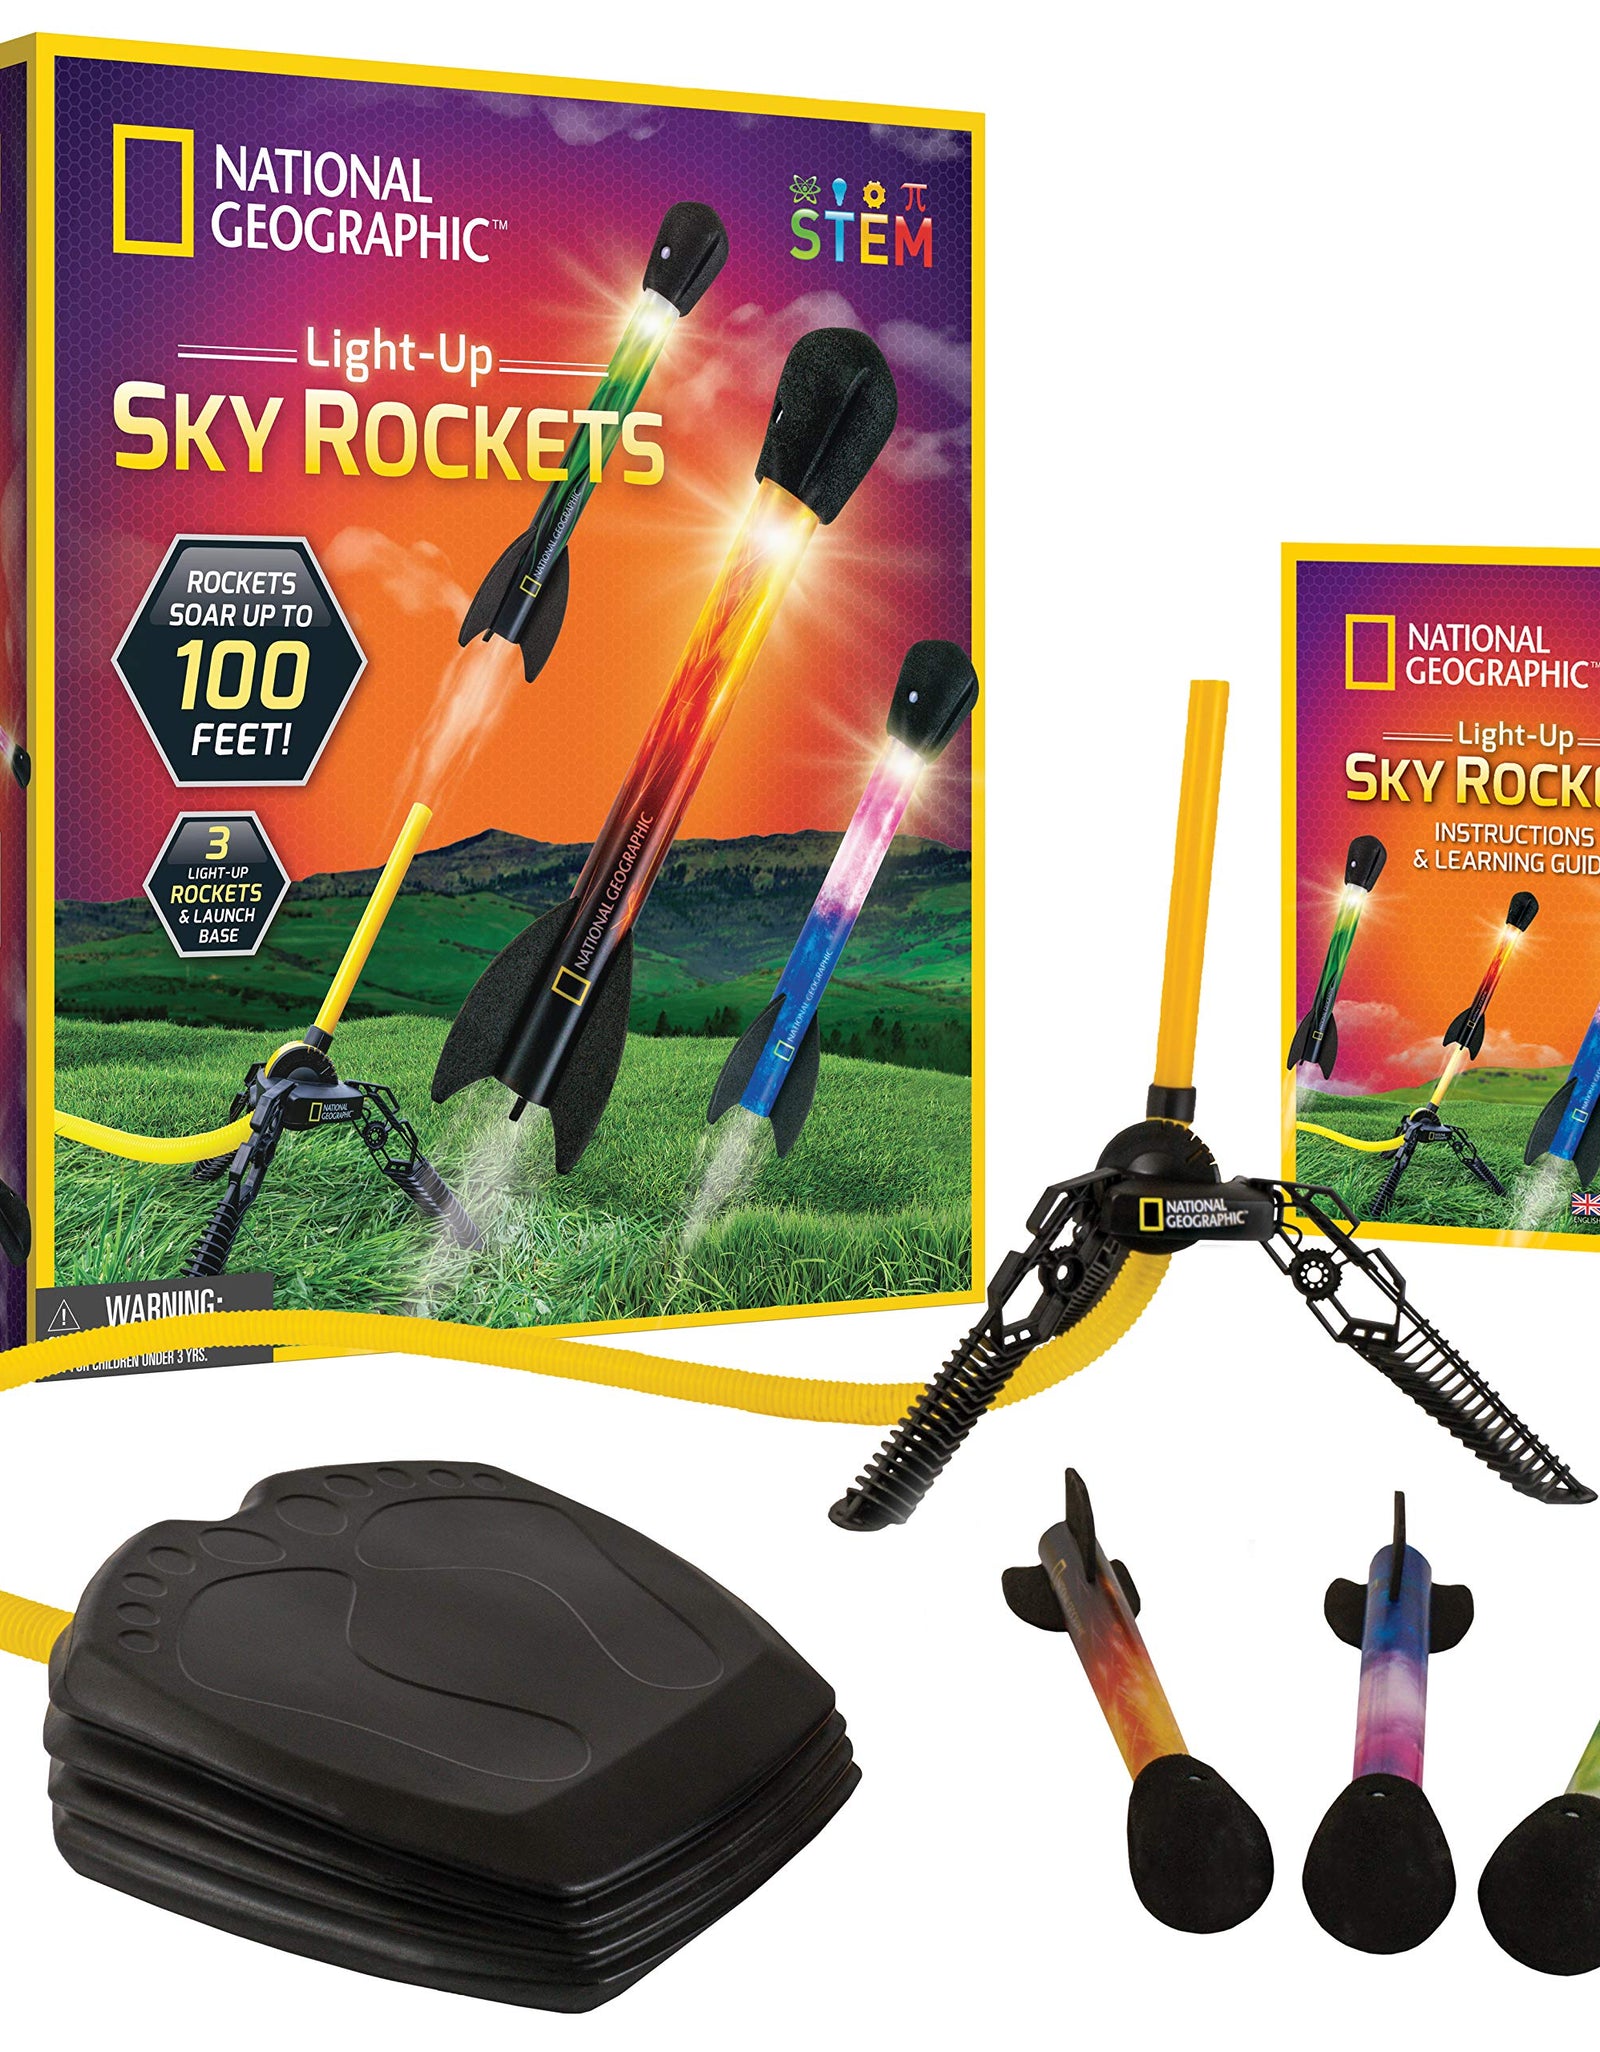 NATIONAL GEOGRAPHIC Air Rocket Toy – Ultimate LED Rocket Launcher for Kids, Stomp and Launch the Light Up, Air Powered, Foam Tipped Rockets up to 100 Feet